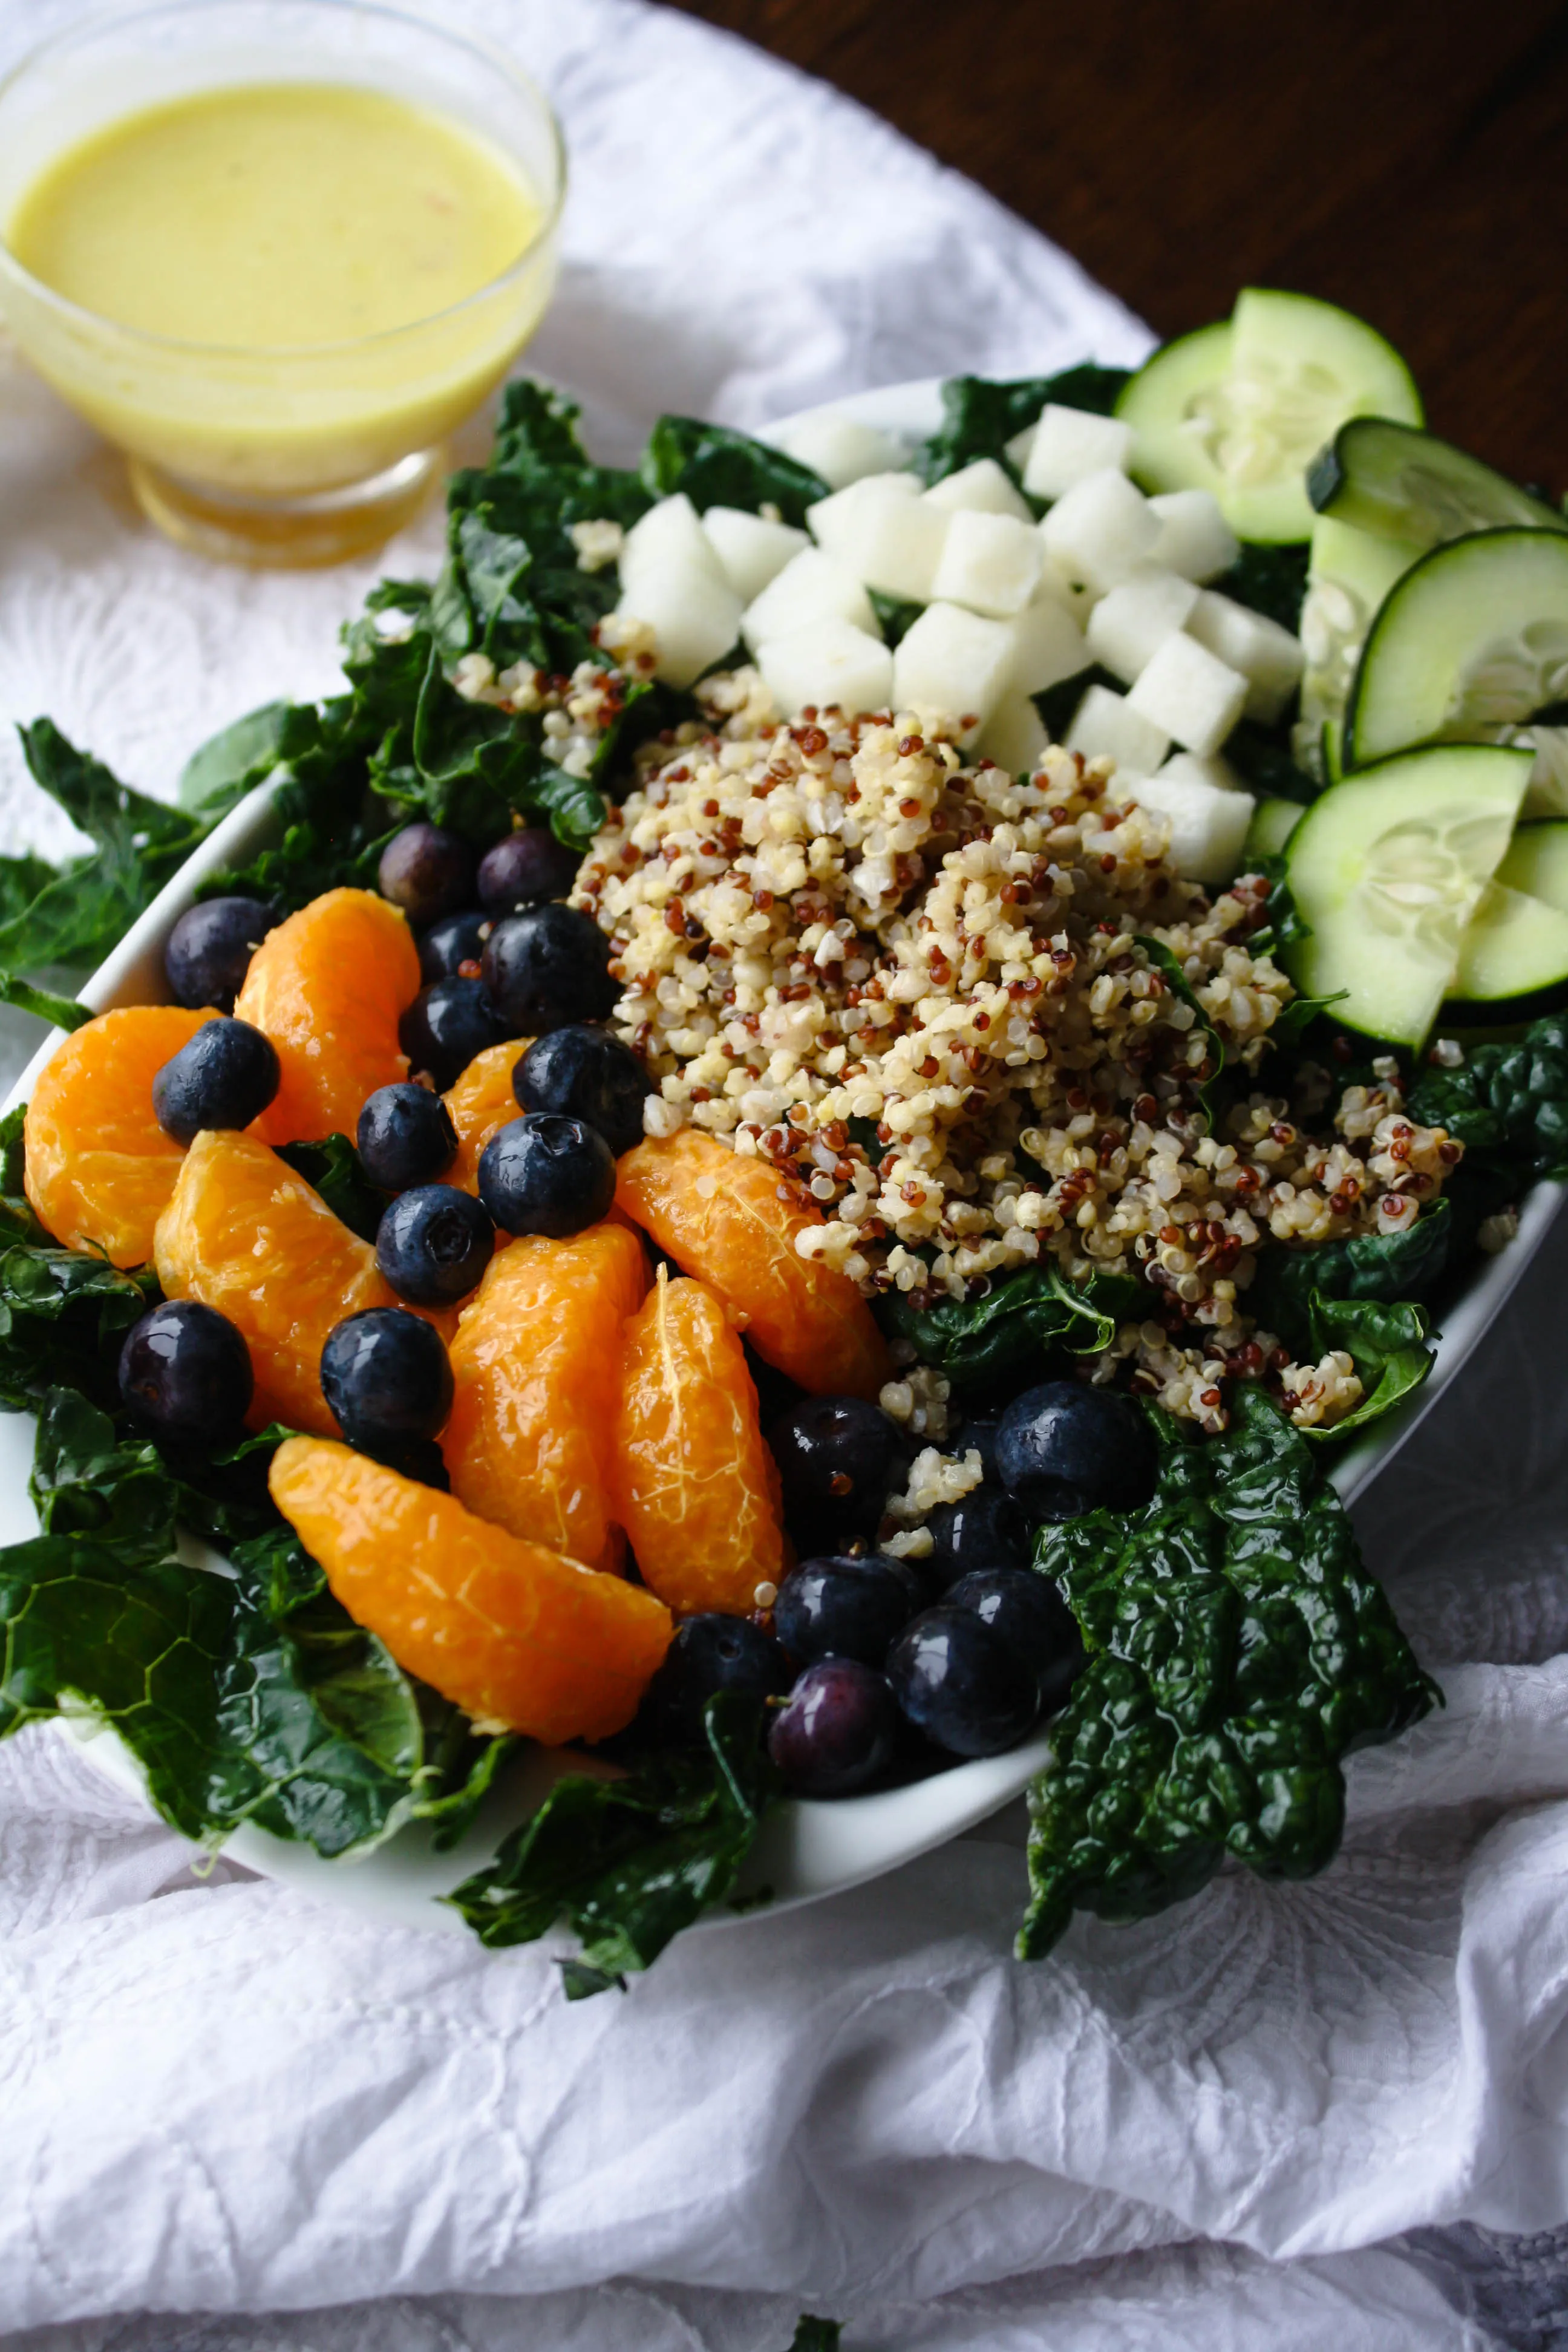 Kale-Quinoa Salad with Orange Vinaigrette is a super-hearty salad. It's easy to make, and has loads of good ingredients!